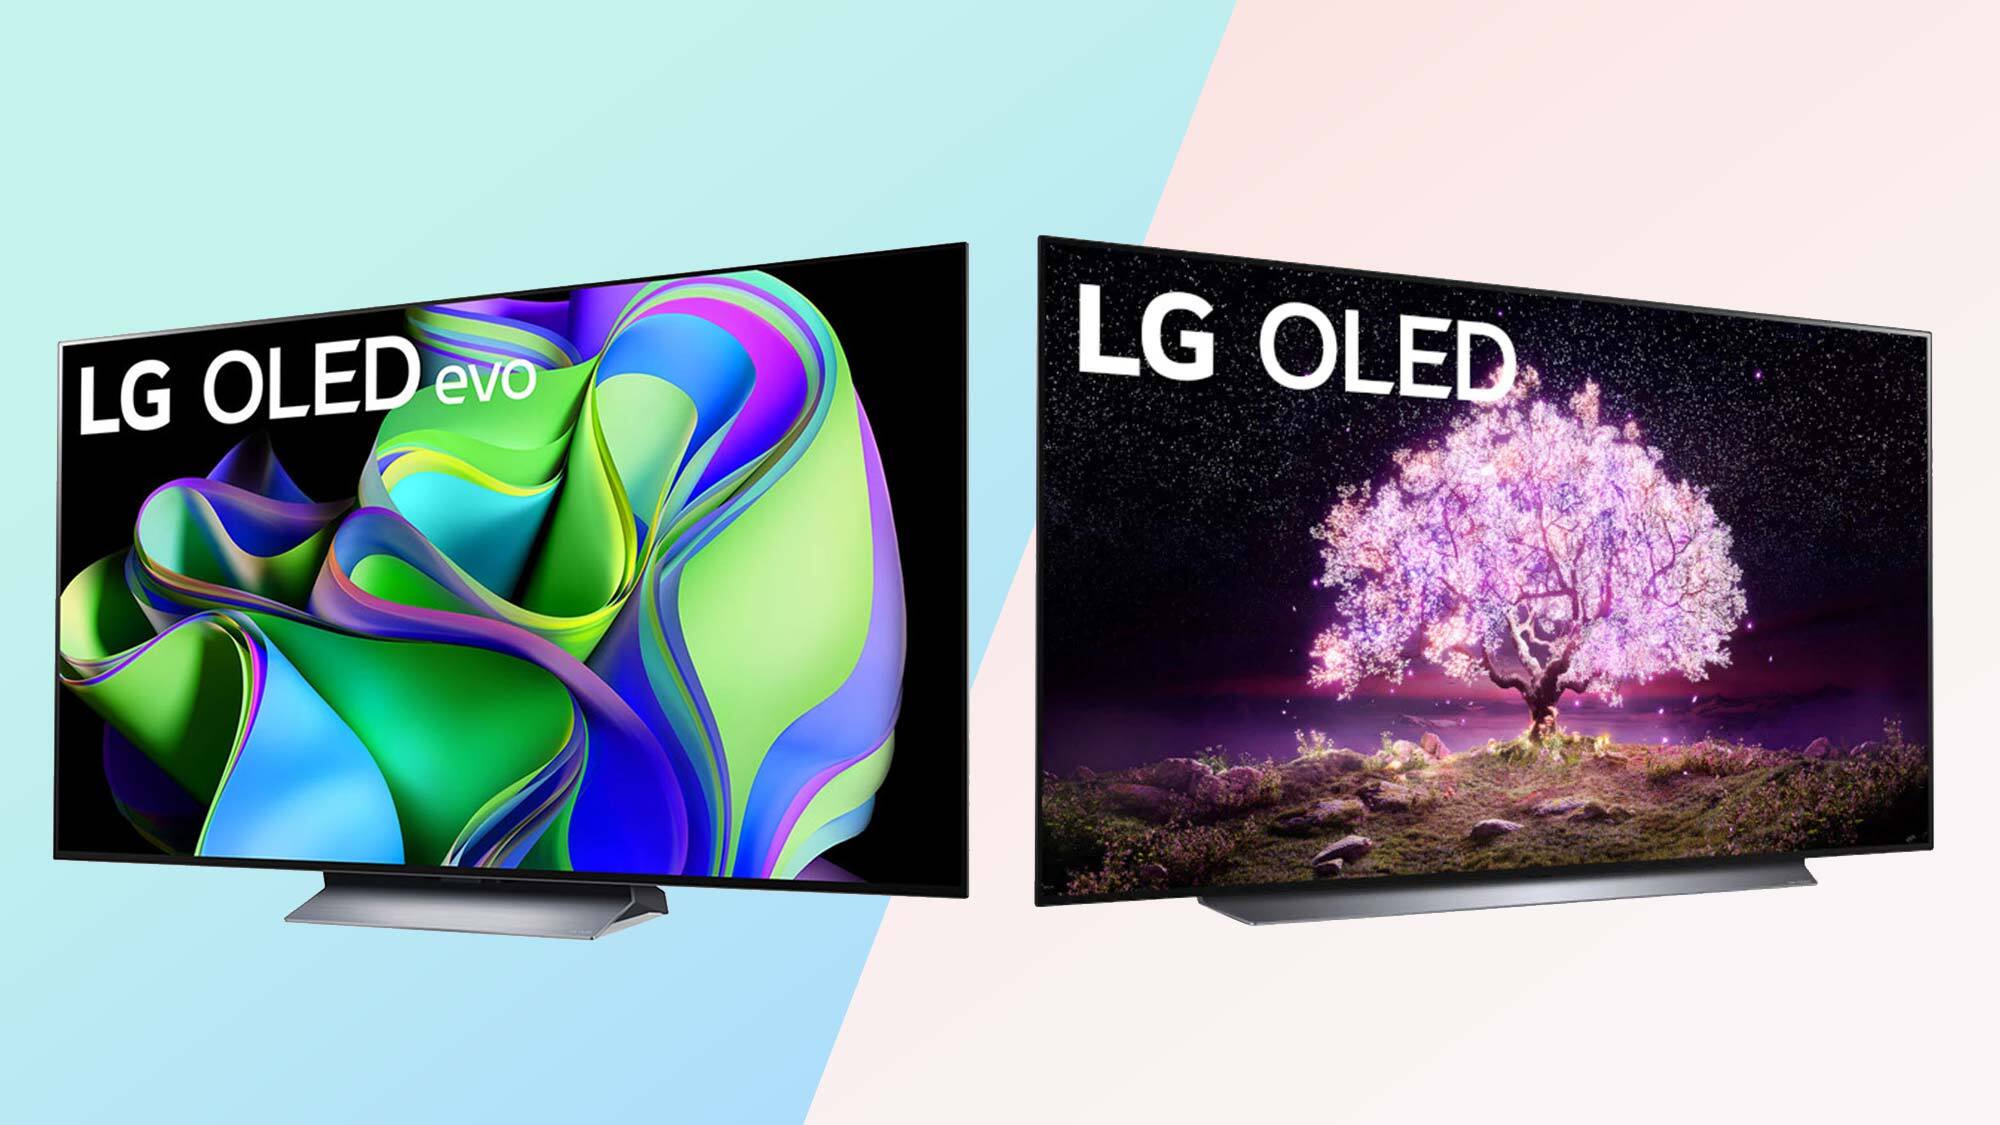 What Is The Difference Between LG OLED Picture On Glass And LG OLED TV